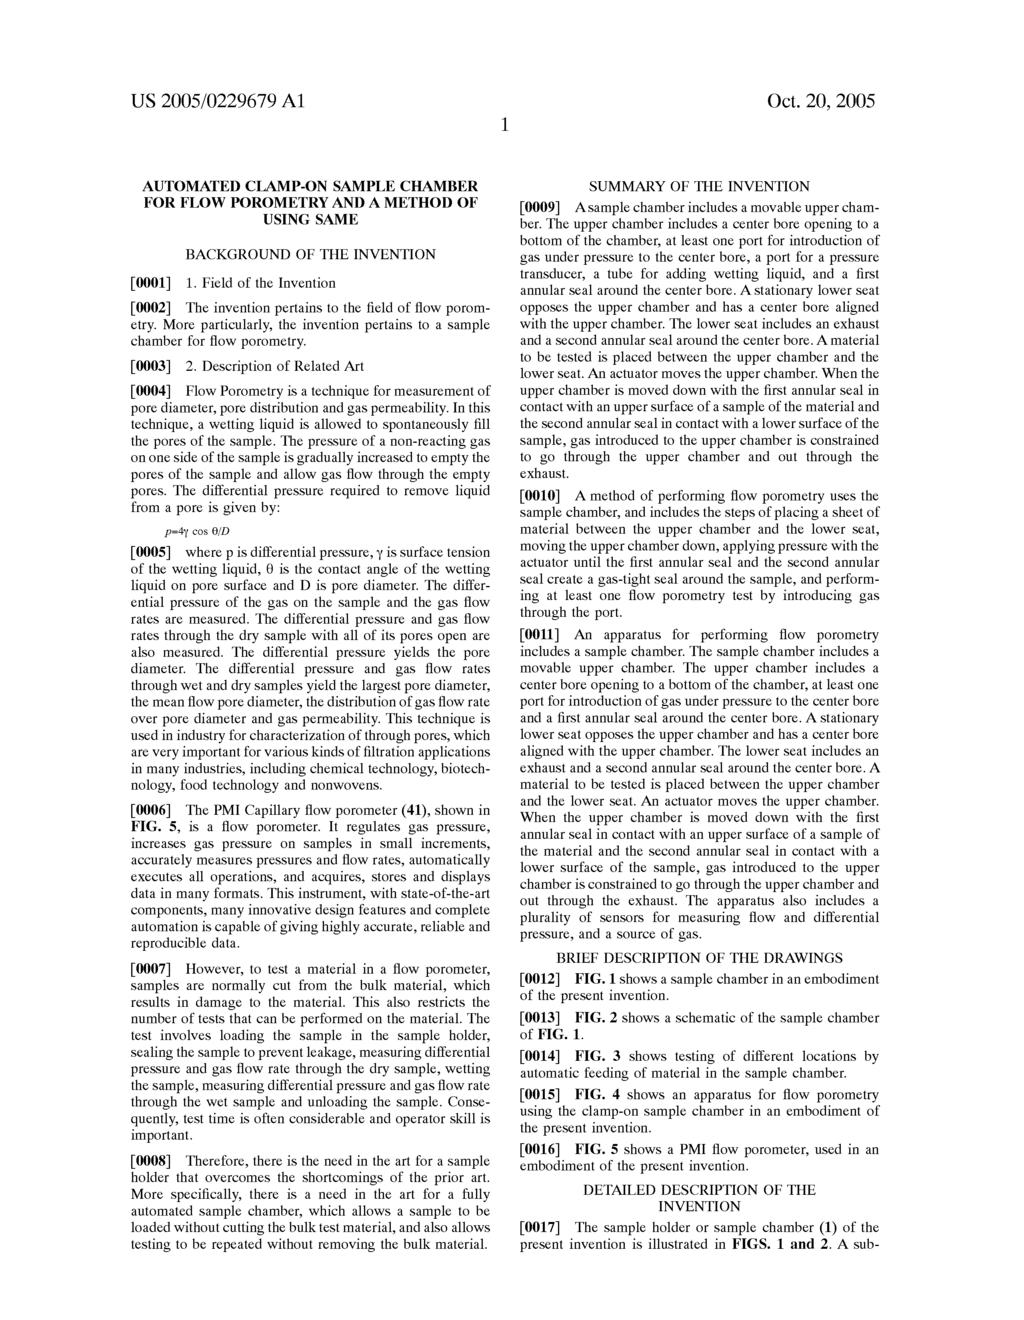 US 2005/0229679 A1 Oct. 20, 2005 AUTOMATED CLAMP-ON SAMPLE CHAMBER FOR FLOW POROMETRY AND A METHOD OF USING SAME BACKGROUND OF THE INVENTION [0001] 1.